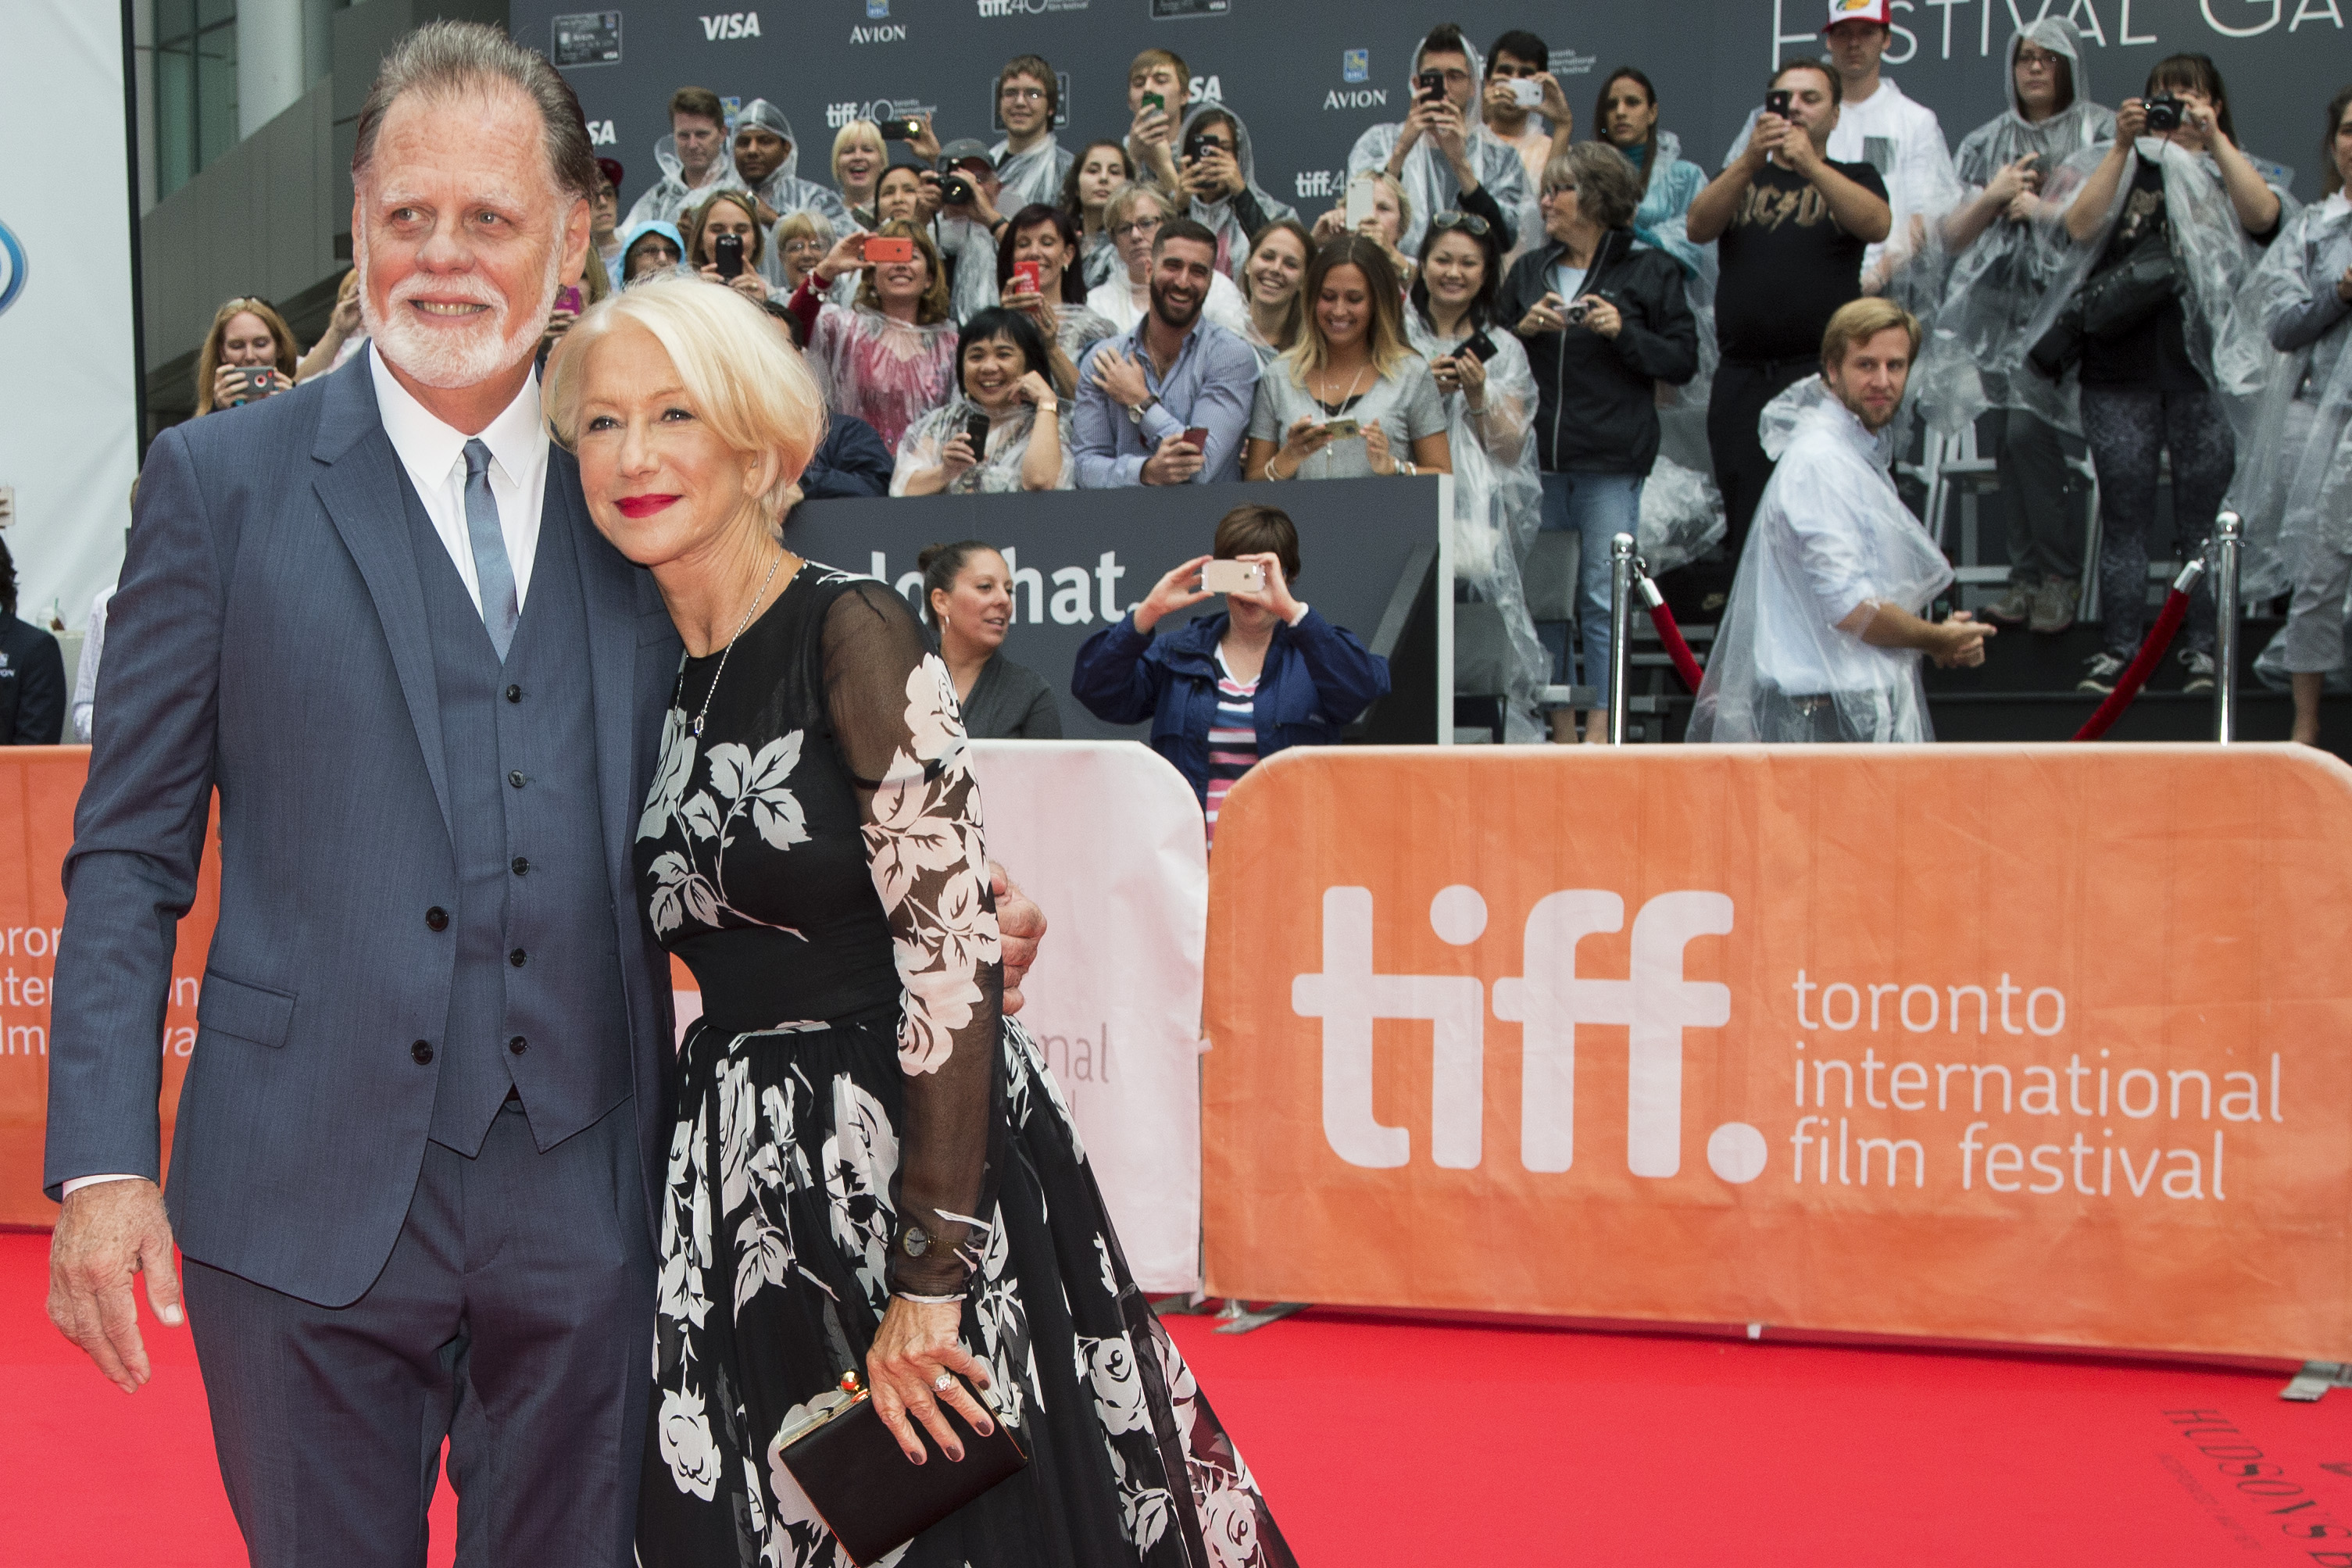 Taylor Hackford and Dame Helen Mirren in Toronto, Canada on September 11, 2015 | Source: Getty Images